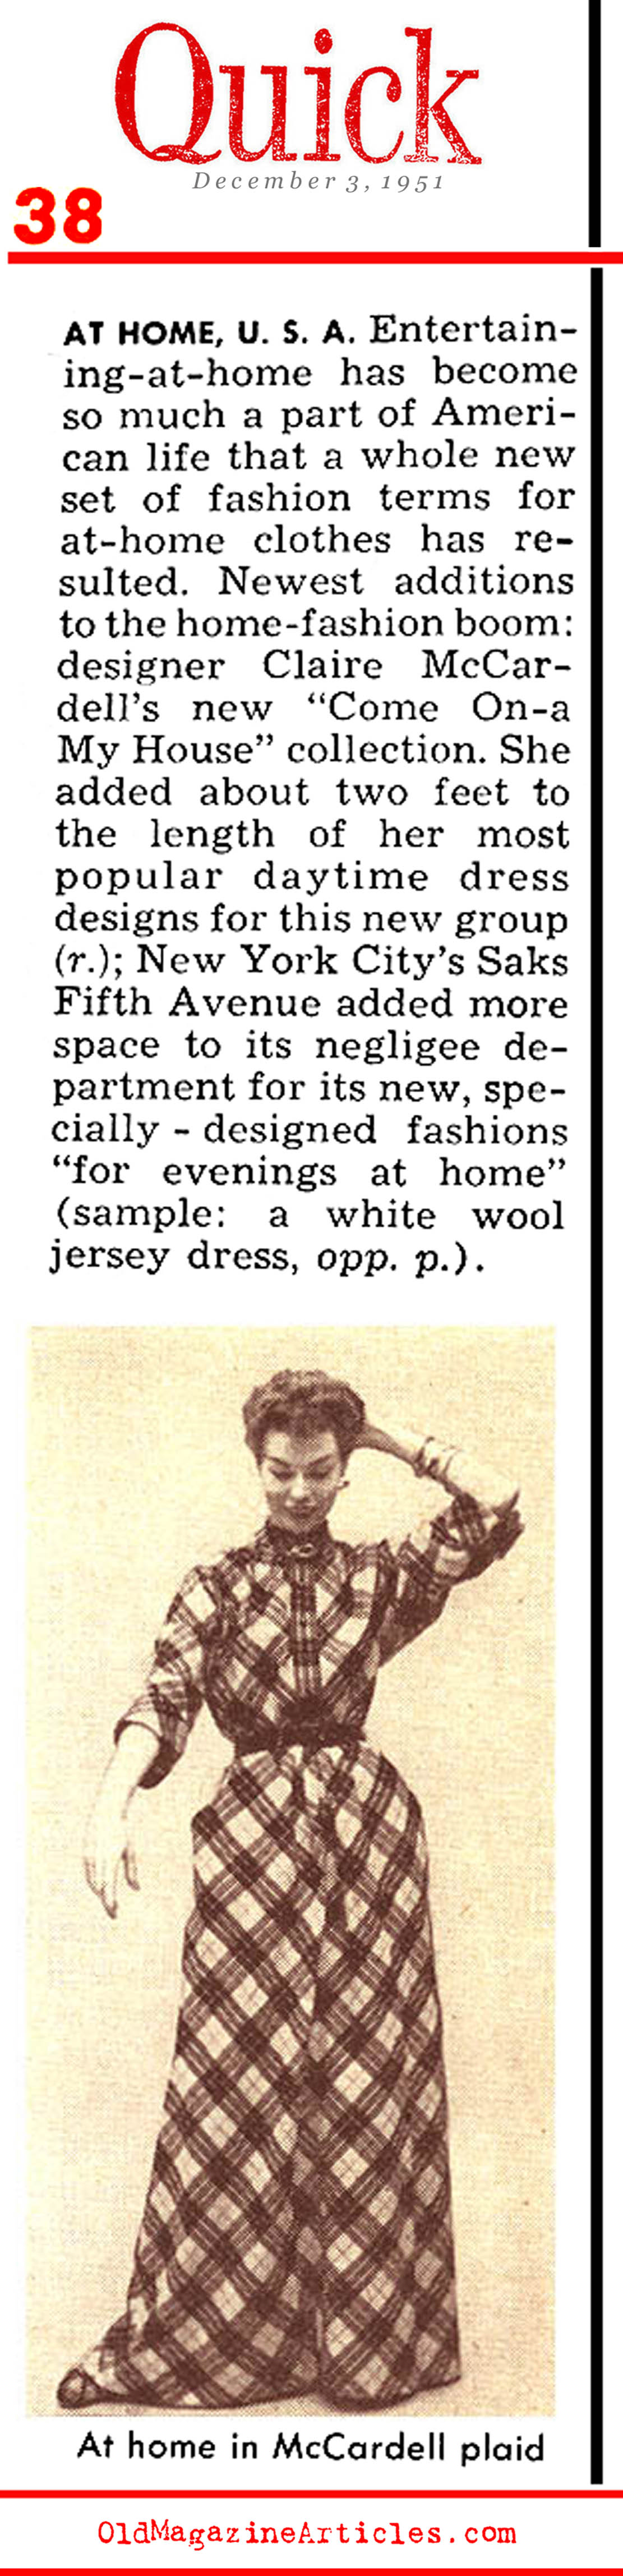 The Strong Economy and its Effect on Fashion (Quick Magazine, 1951)